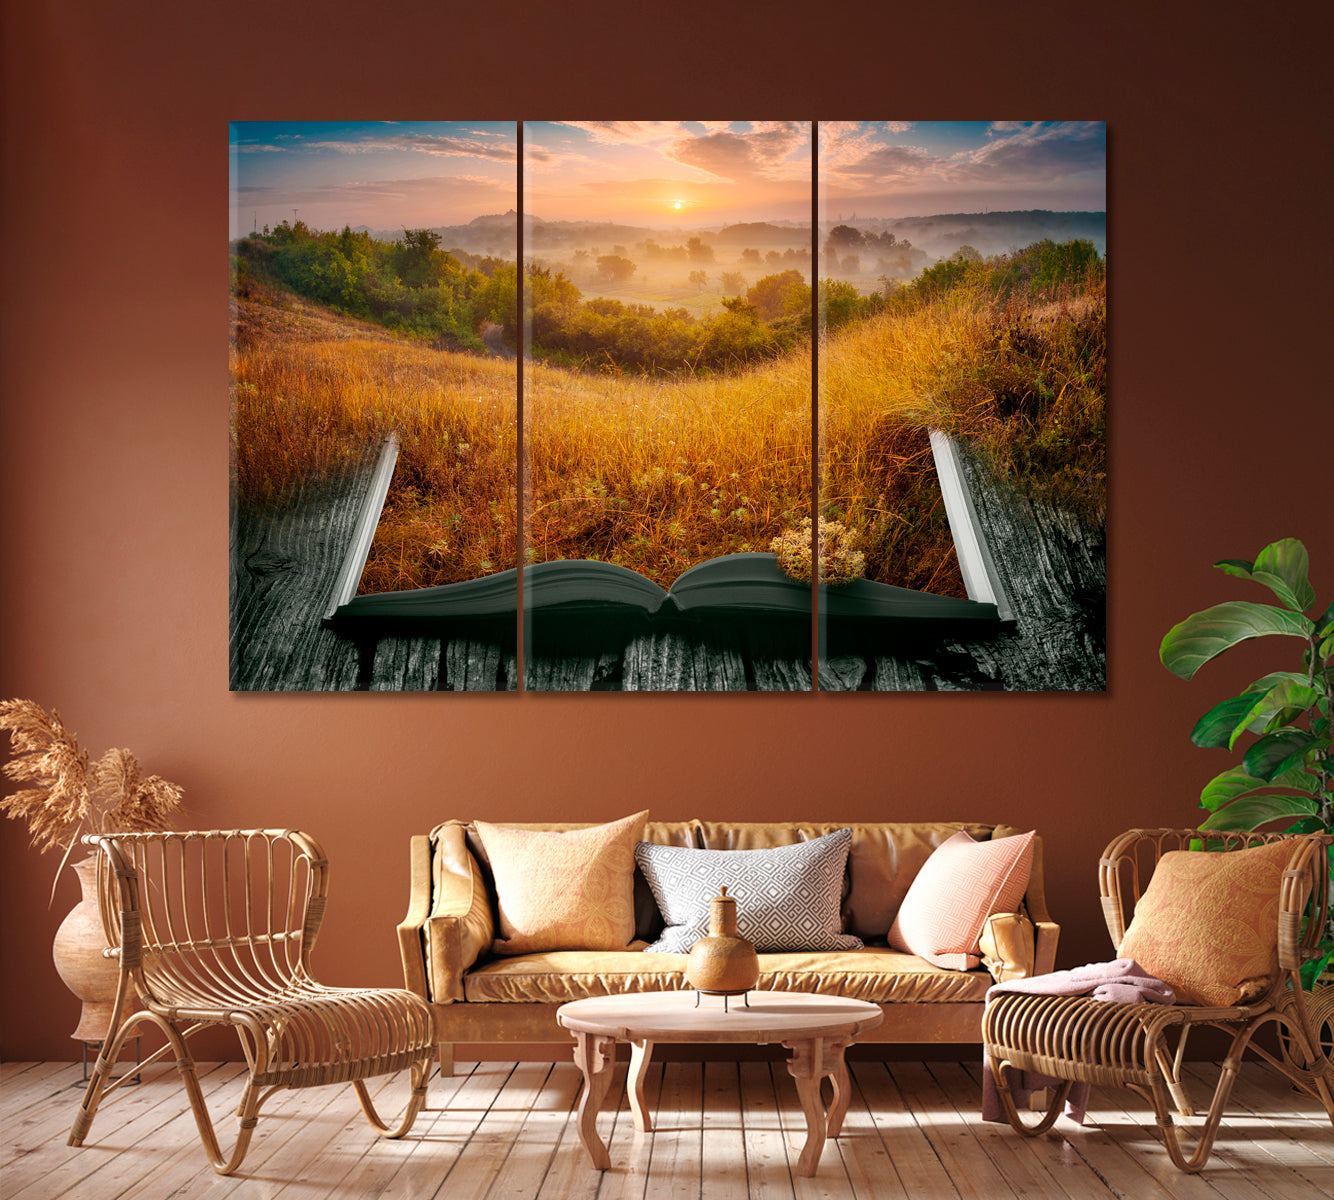 Summer Misty Valley on Pages of Magical Book Canvas Print ArtLexy 3 Panels 36"x24" inches 